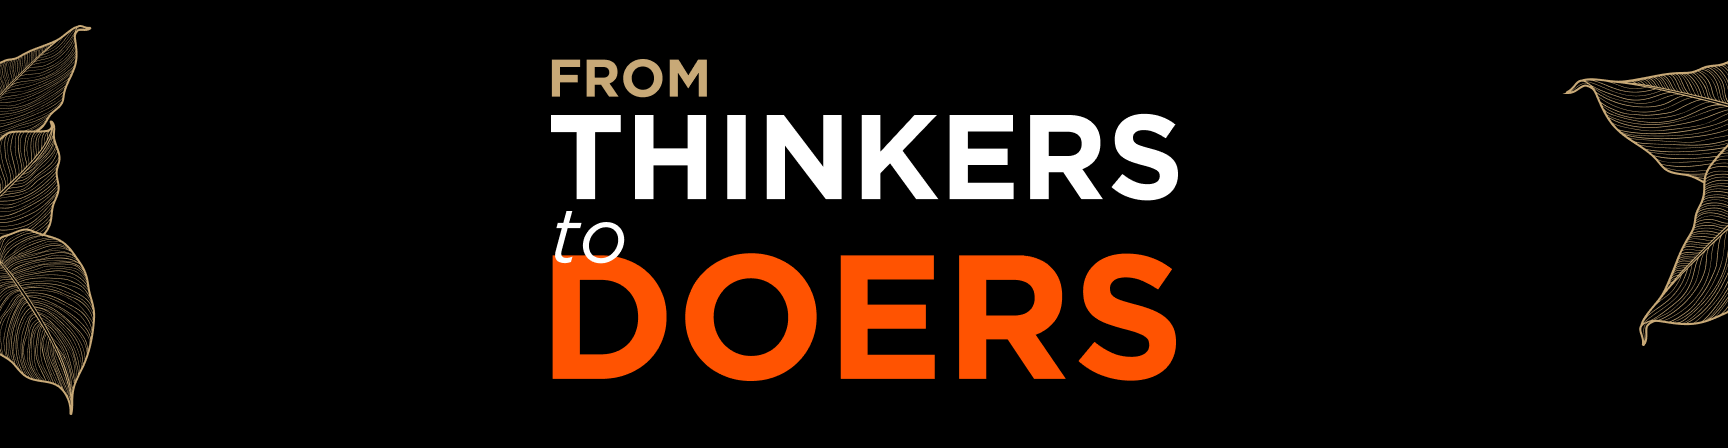 From thinkers to doers banner